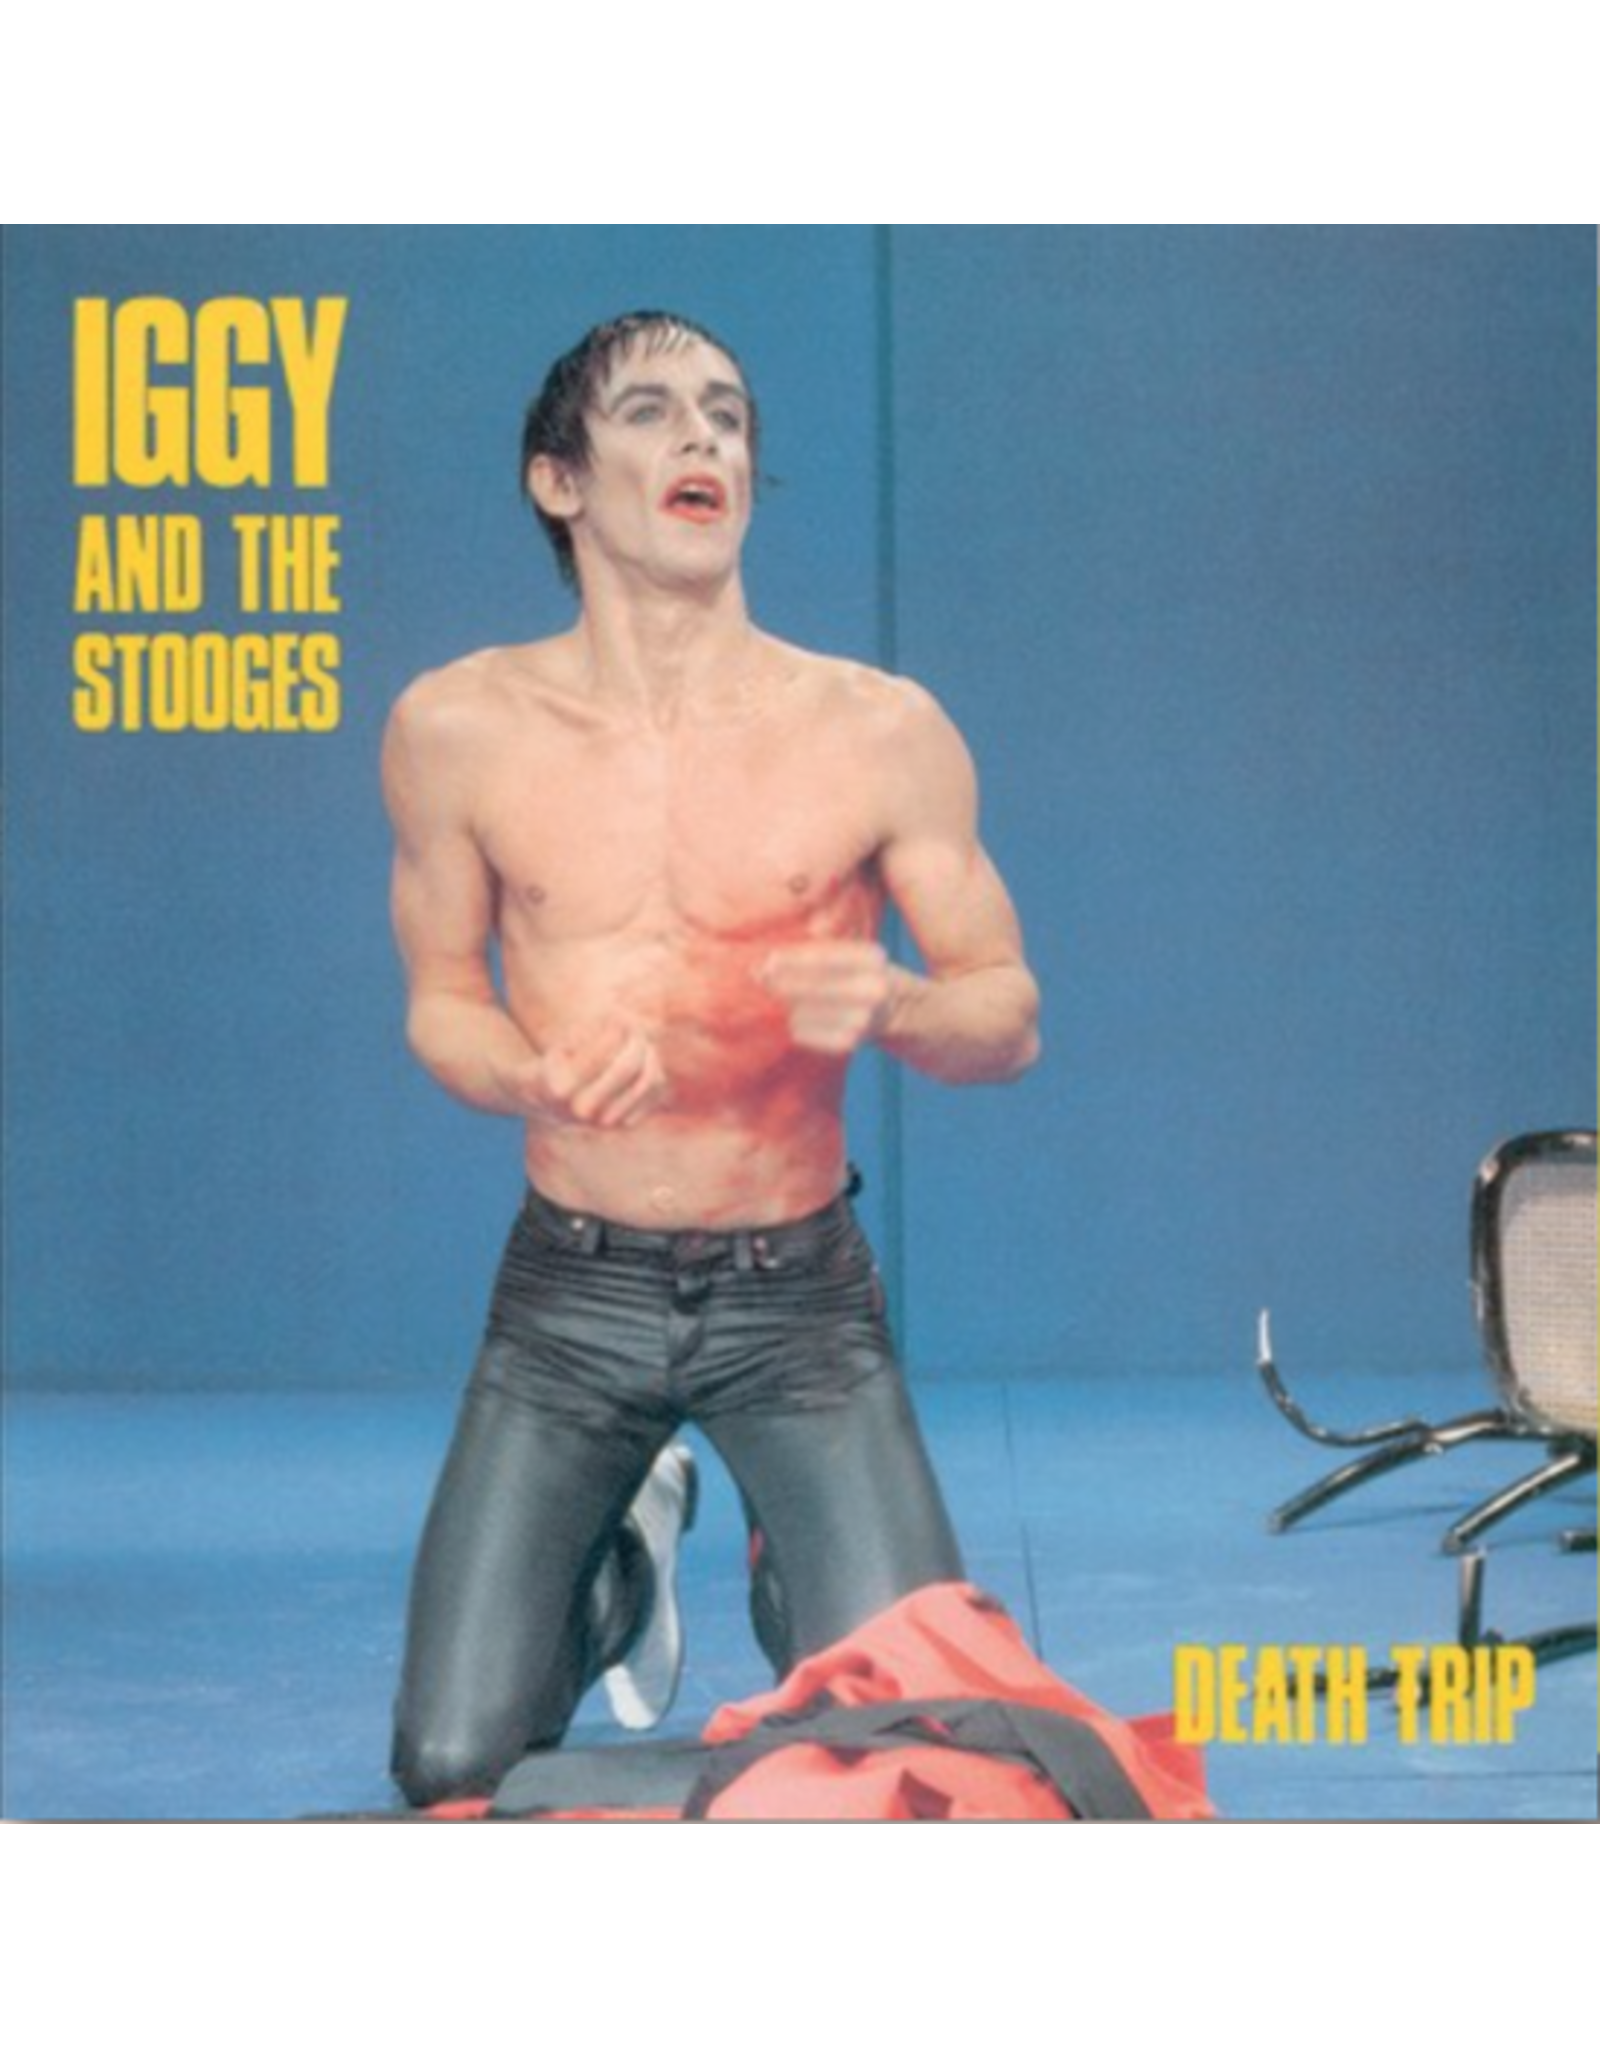 Digger's Factory Iggy and The Stooges: Death Trip LP